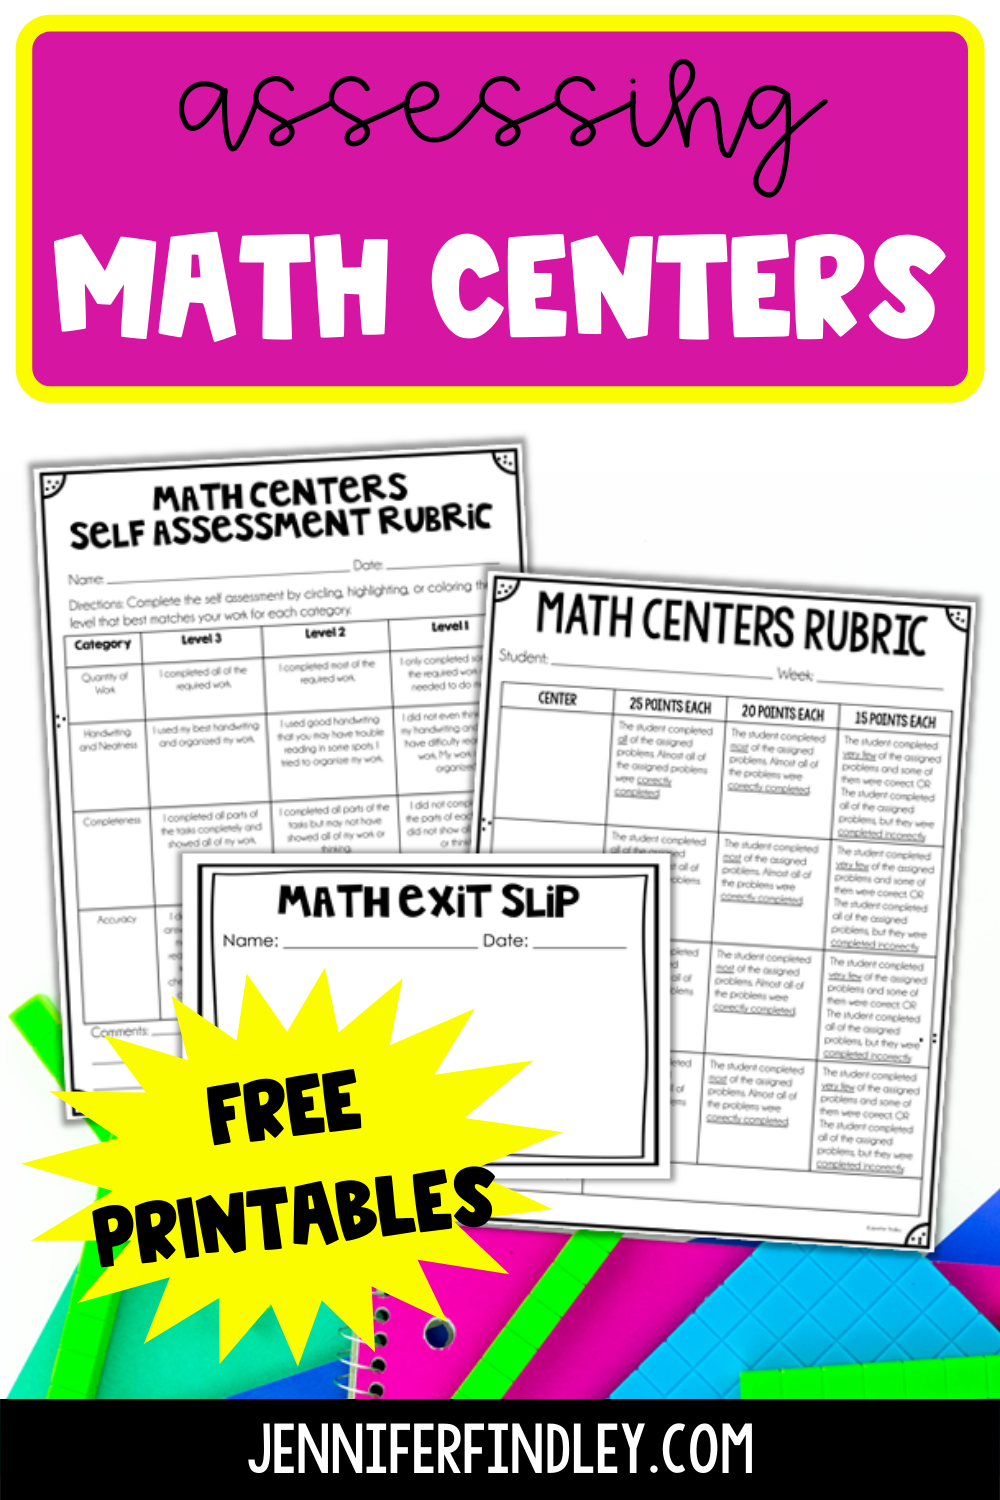 Assessing math centers made easy with these tips and free forms. Math center work can be frustrating to grade. Read this post for ideas to make it more efficient.